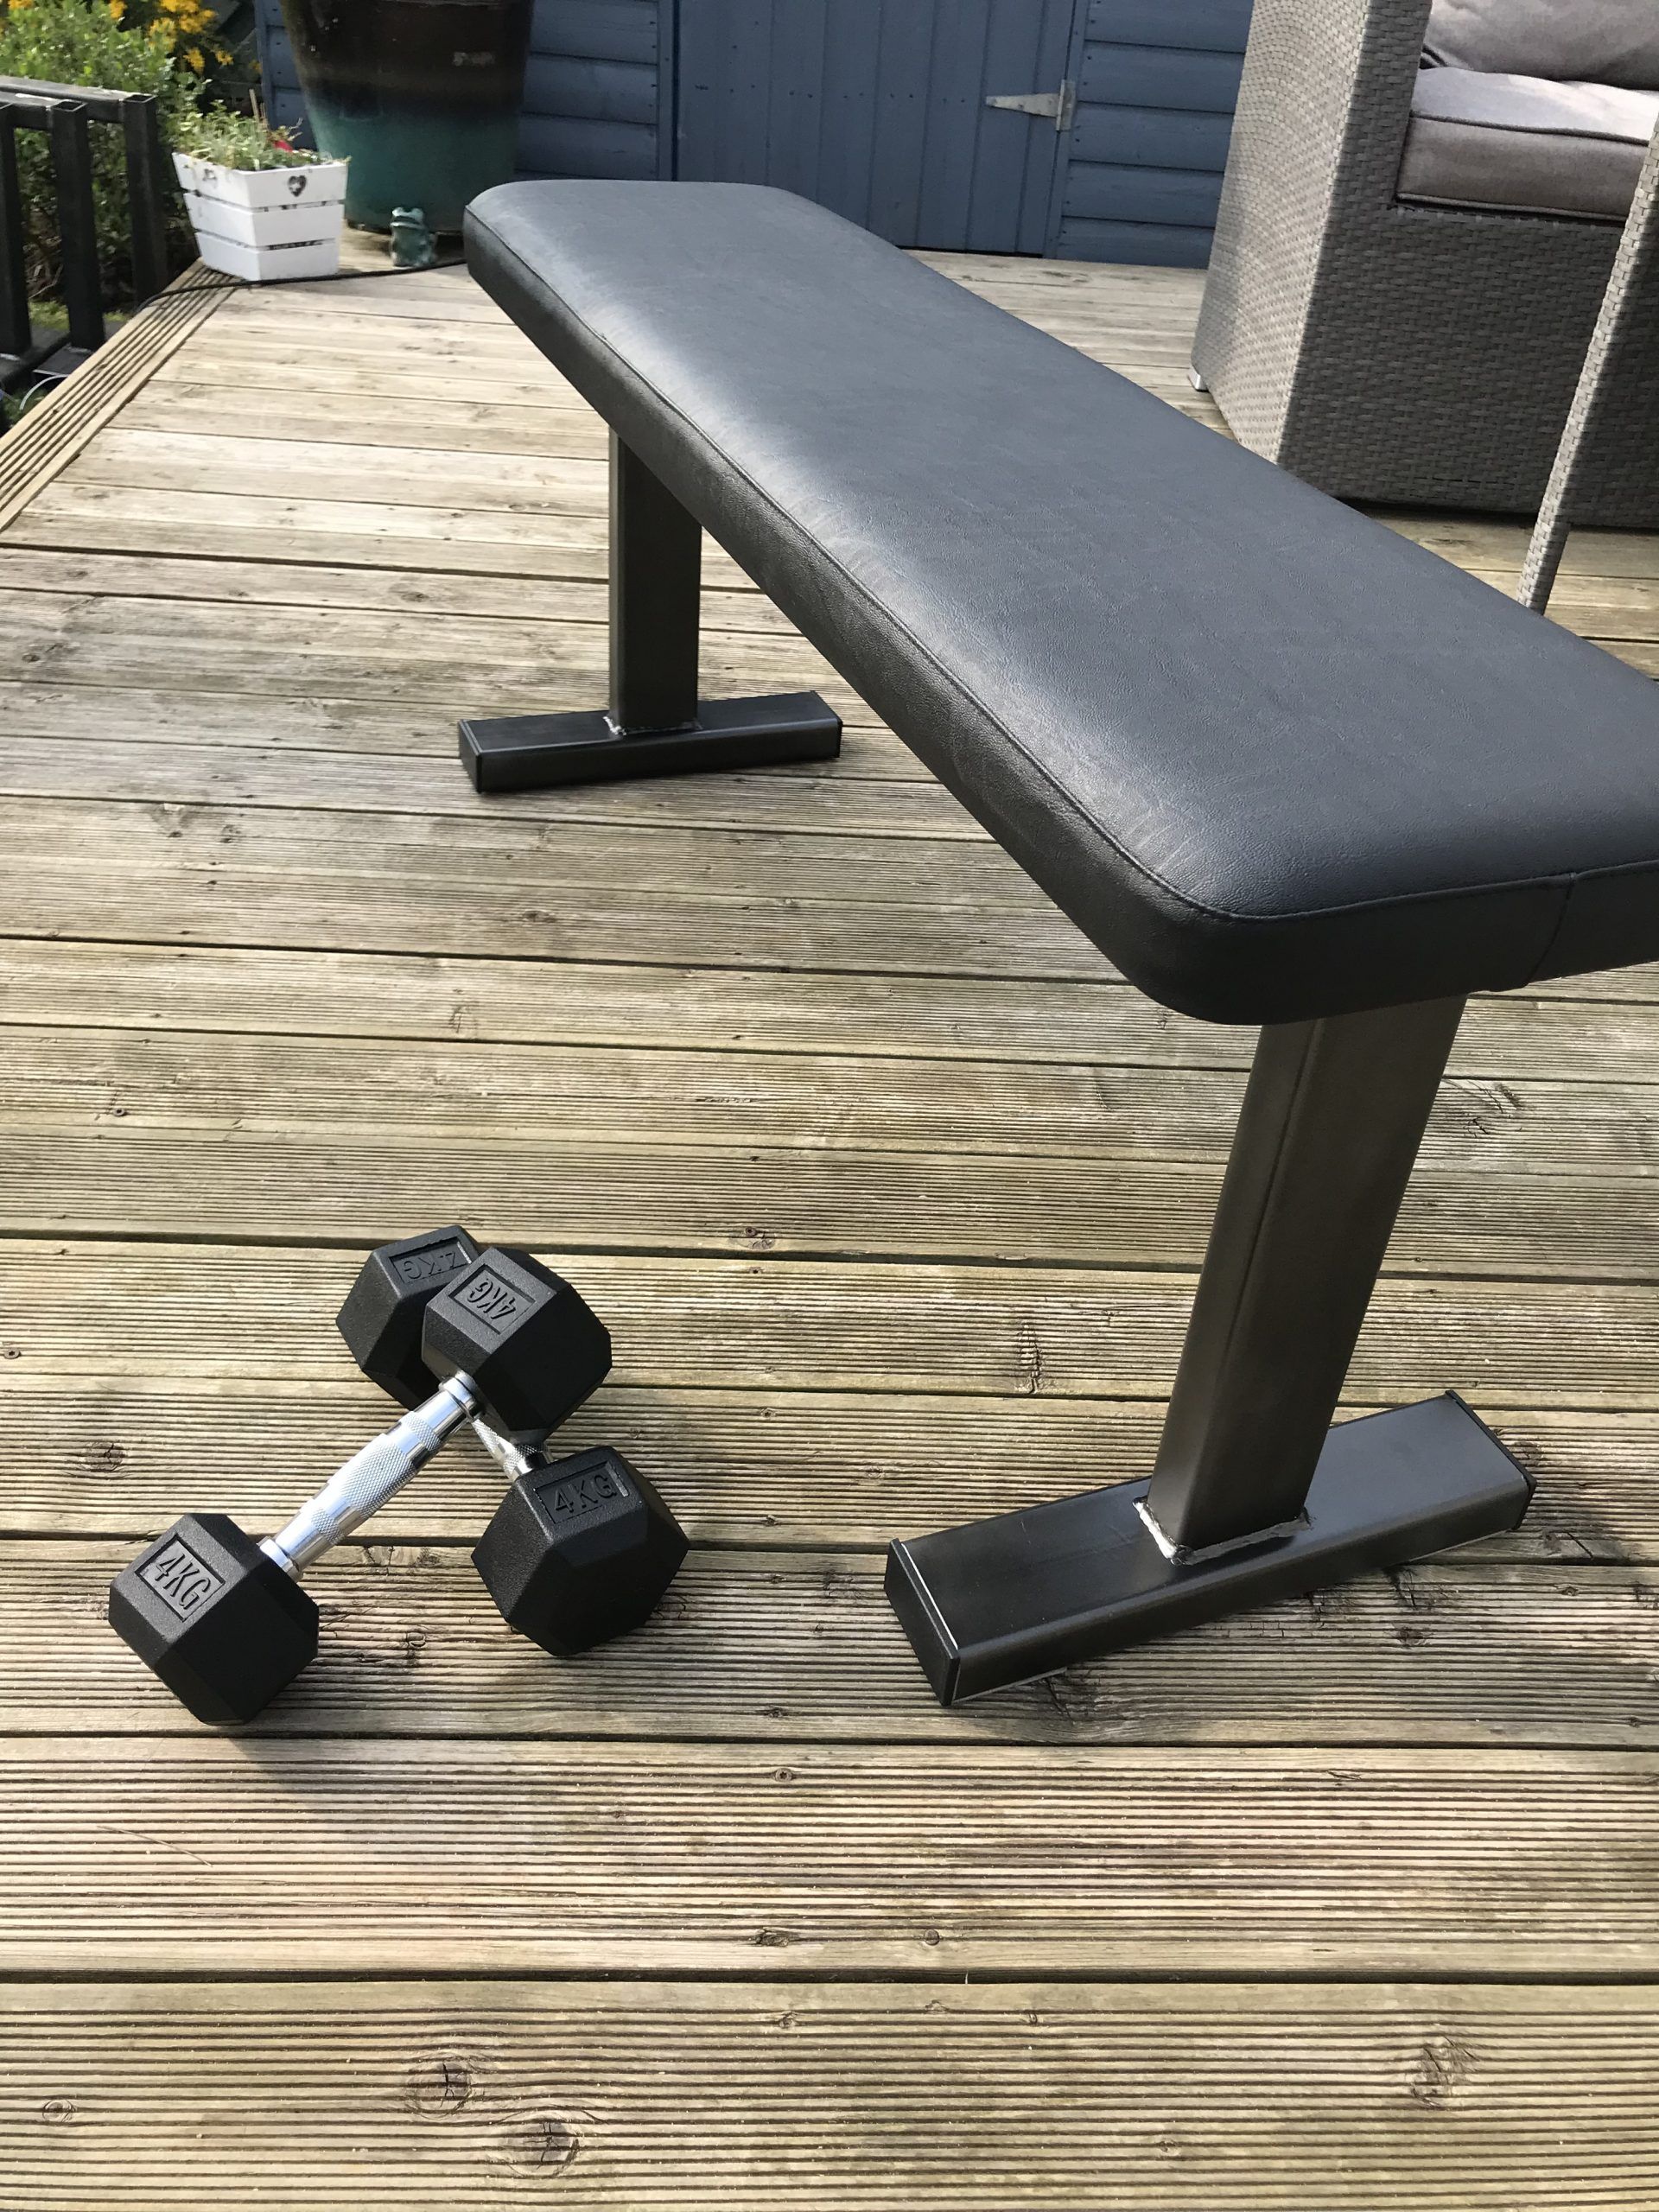 6 Day Fitness Gear Workout Bench for Women